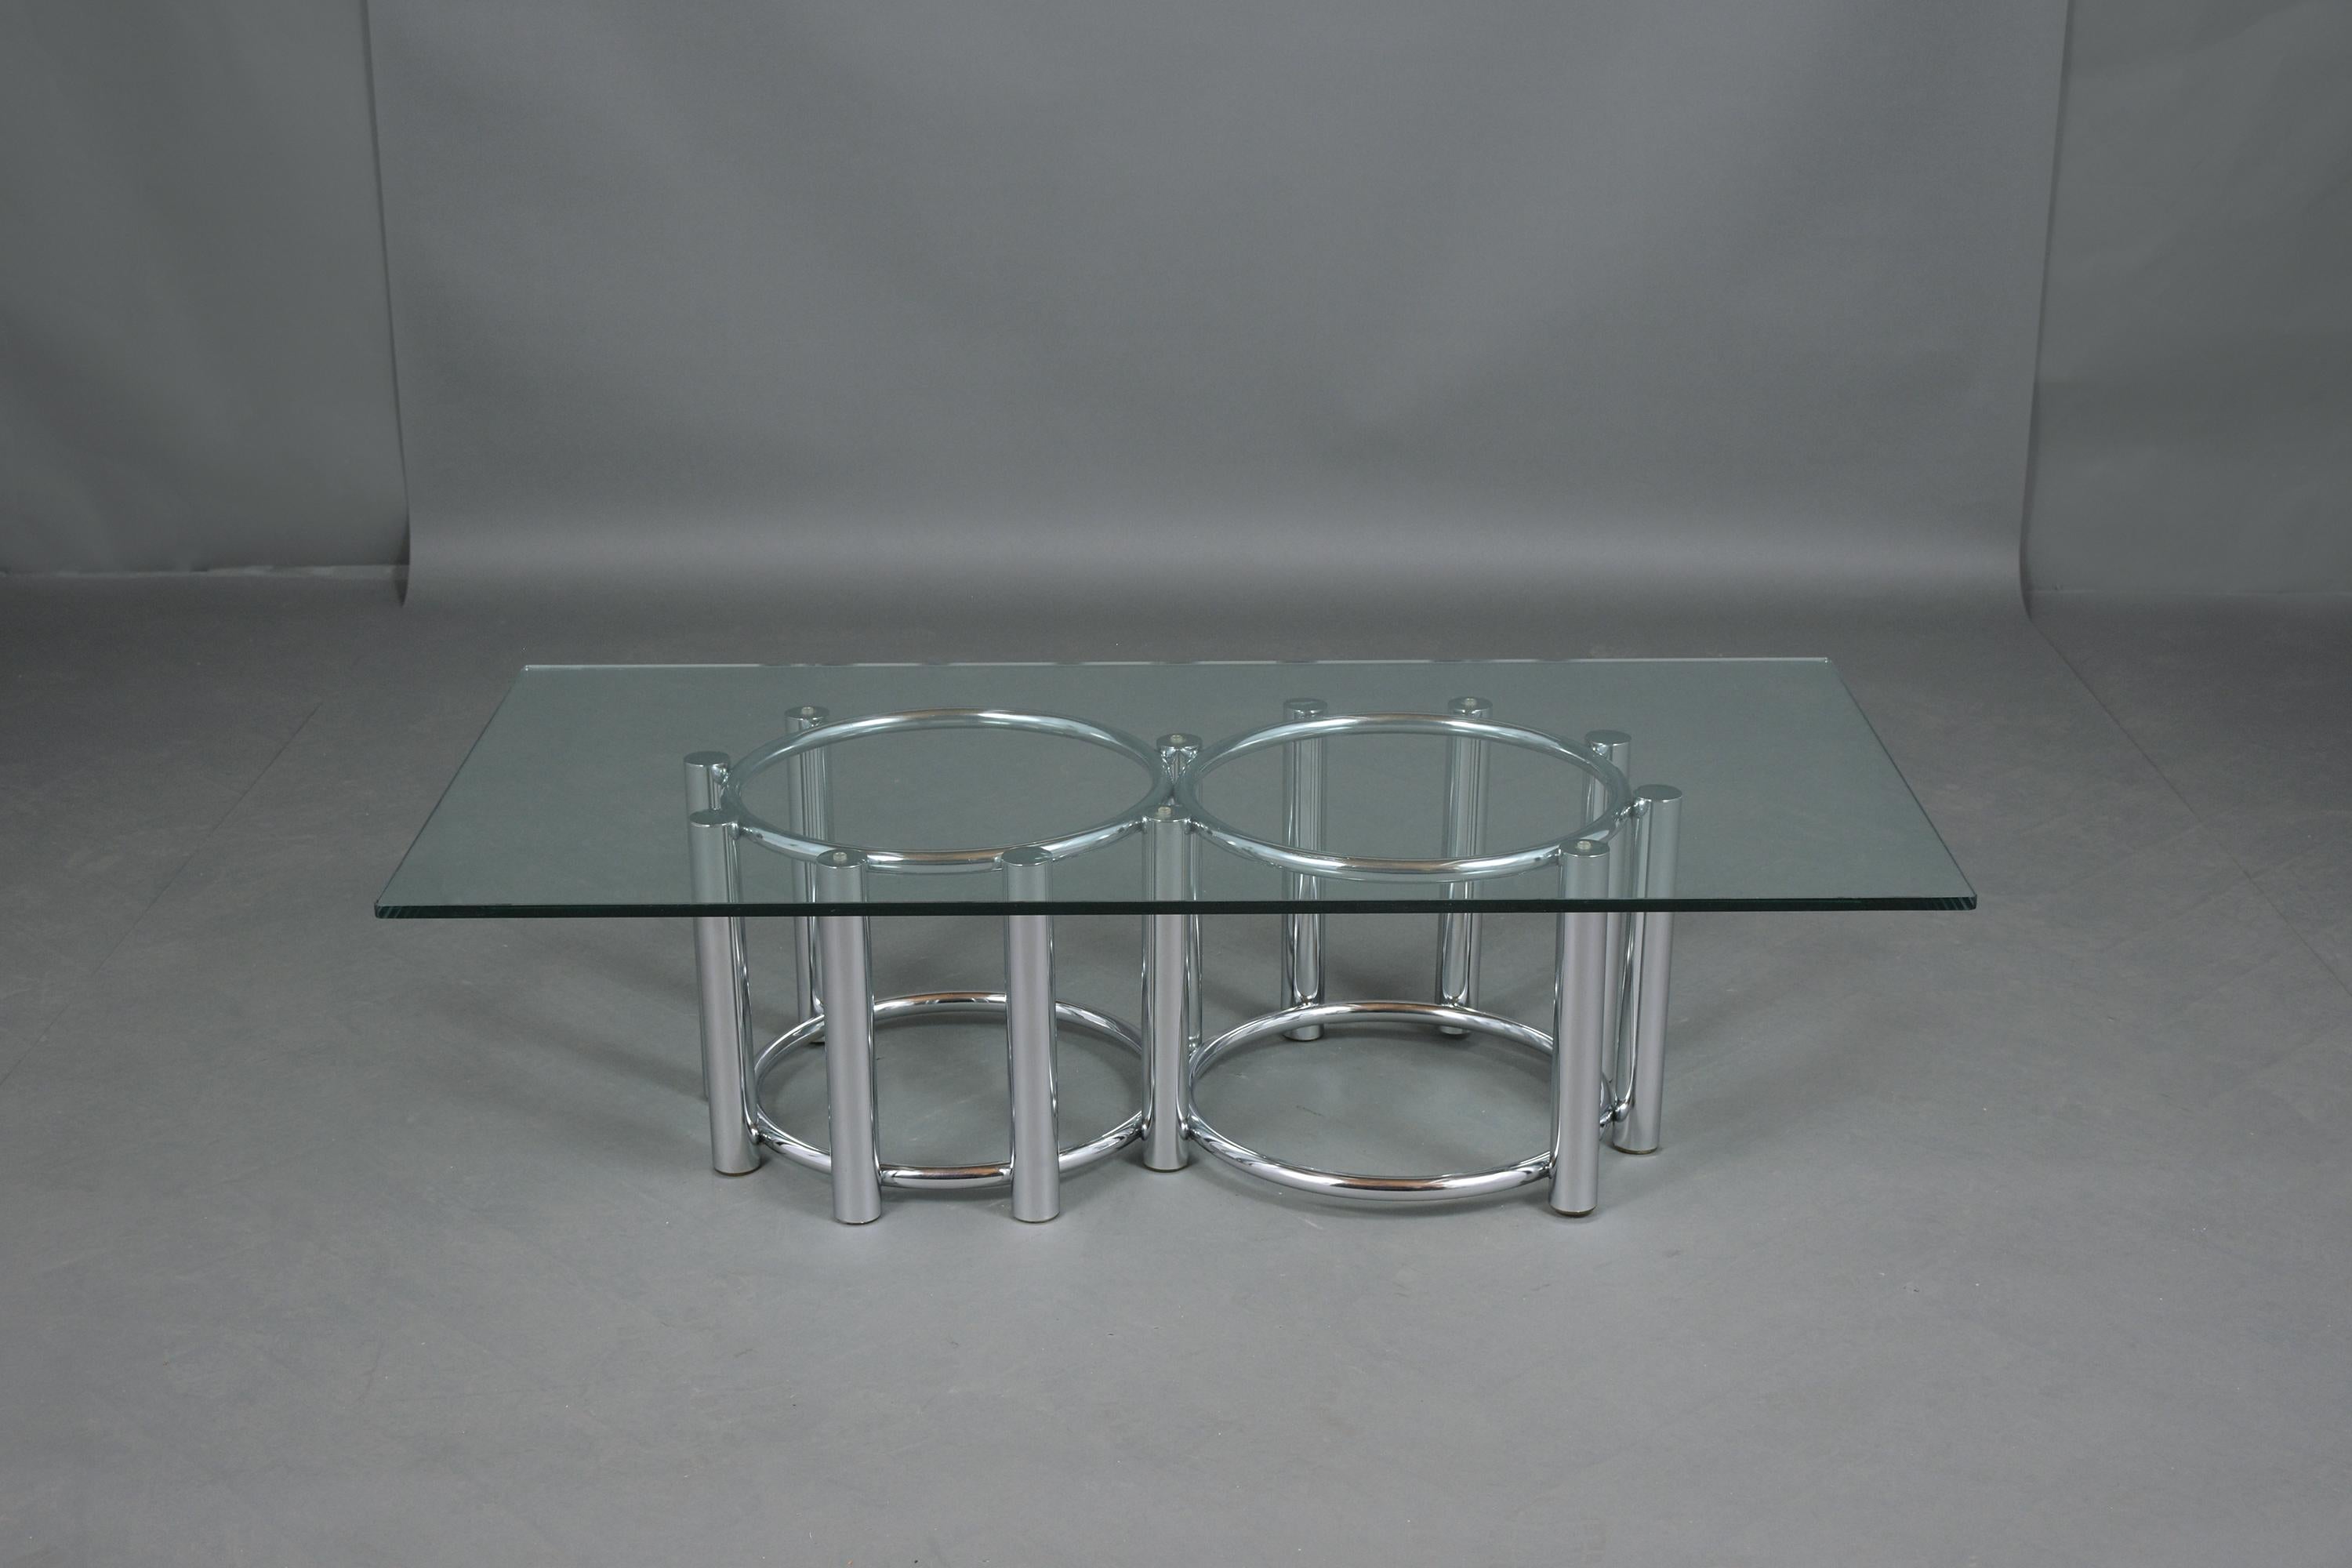 An extraordinary 1960s mid-century coffee table crafted out of steel with a chrome finish in great condition and has been professionally restored by our team of expert craftsmen. This piece features a new tempered clear glass top supported by a